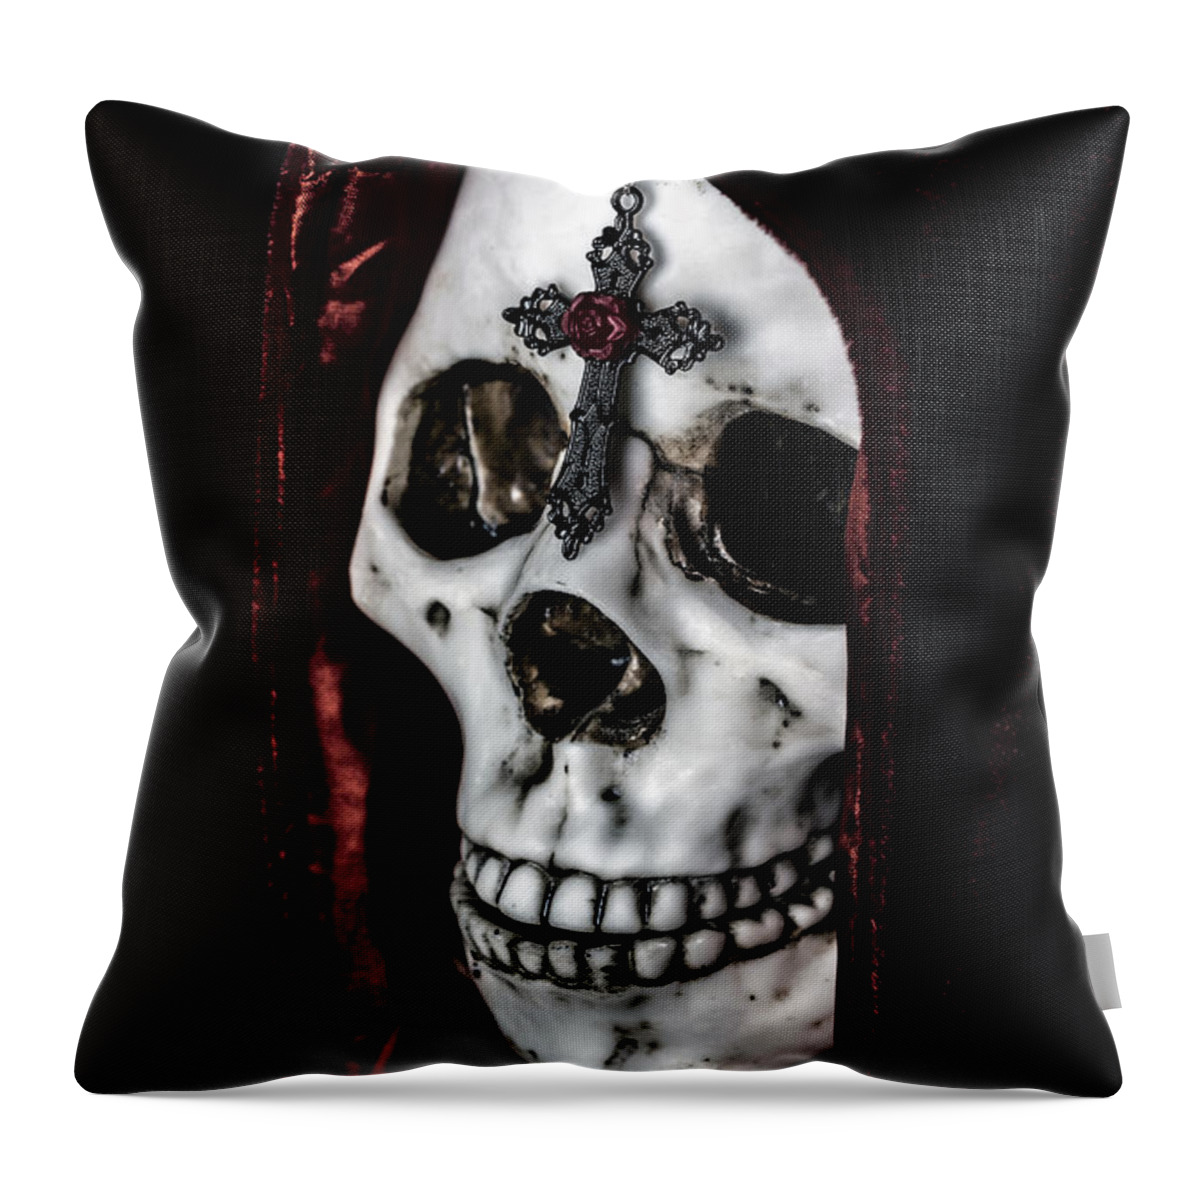 Skull Throw Pillow featuring the photograph Dead Knight #1 by Joana Kruse